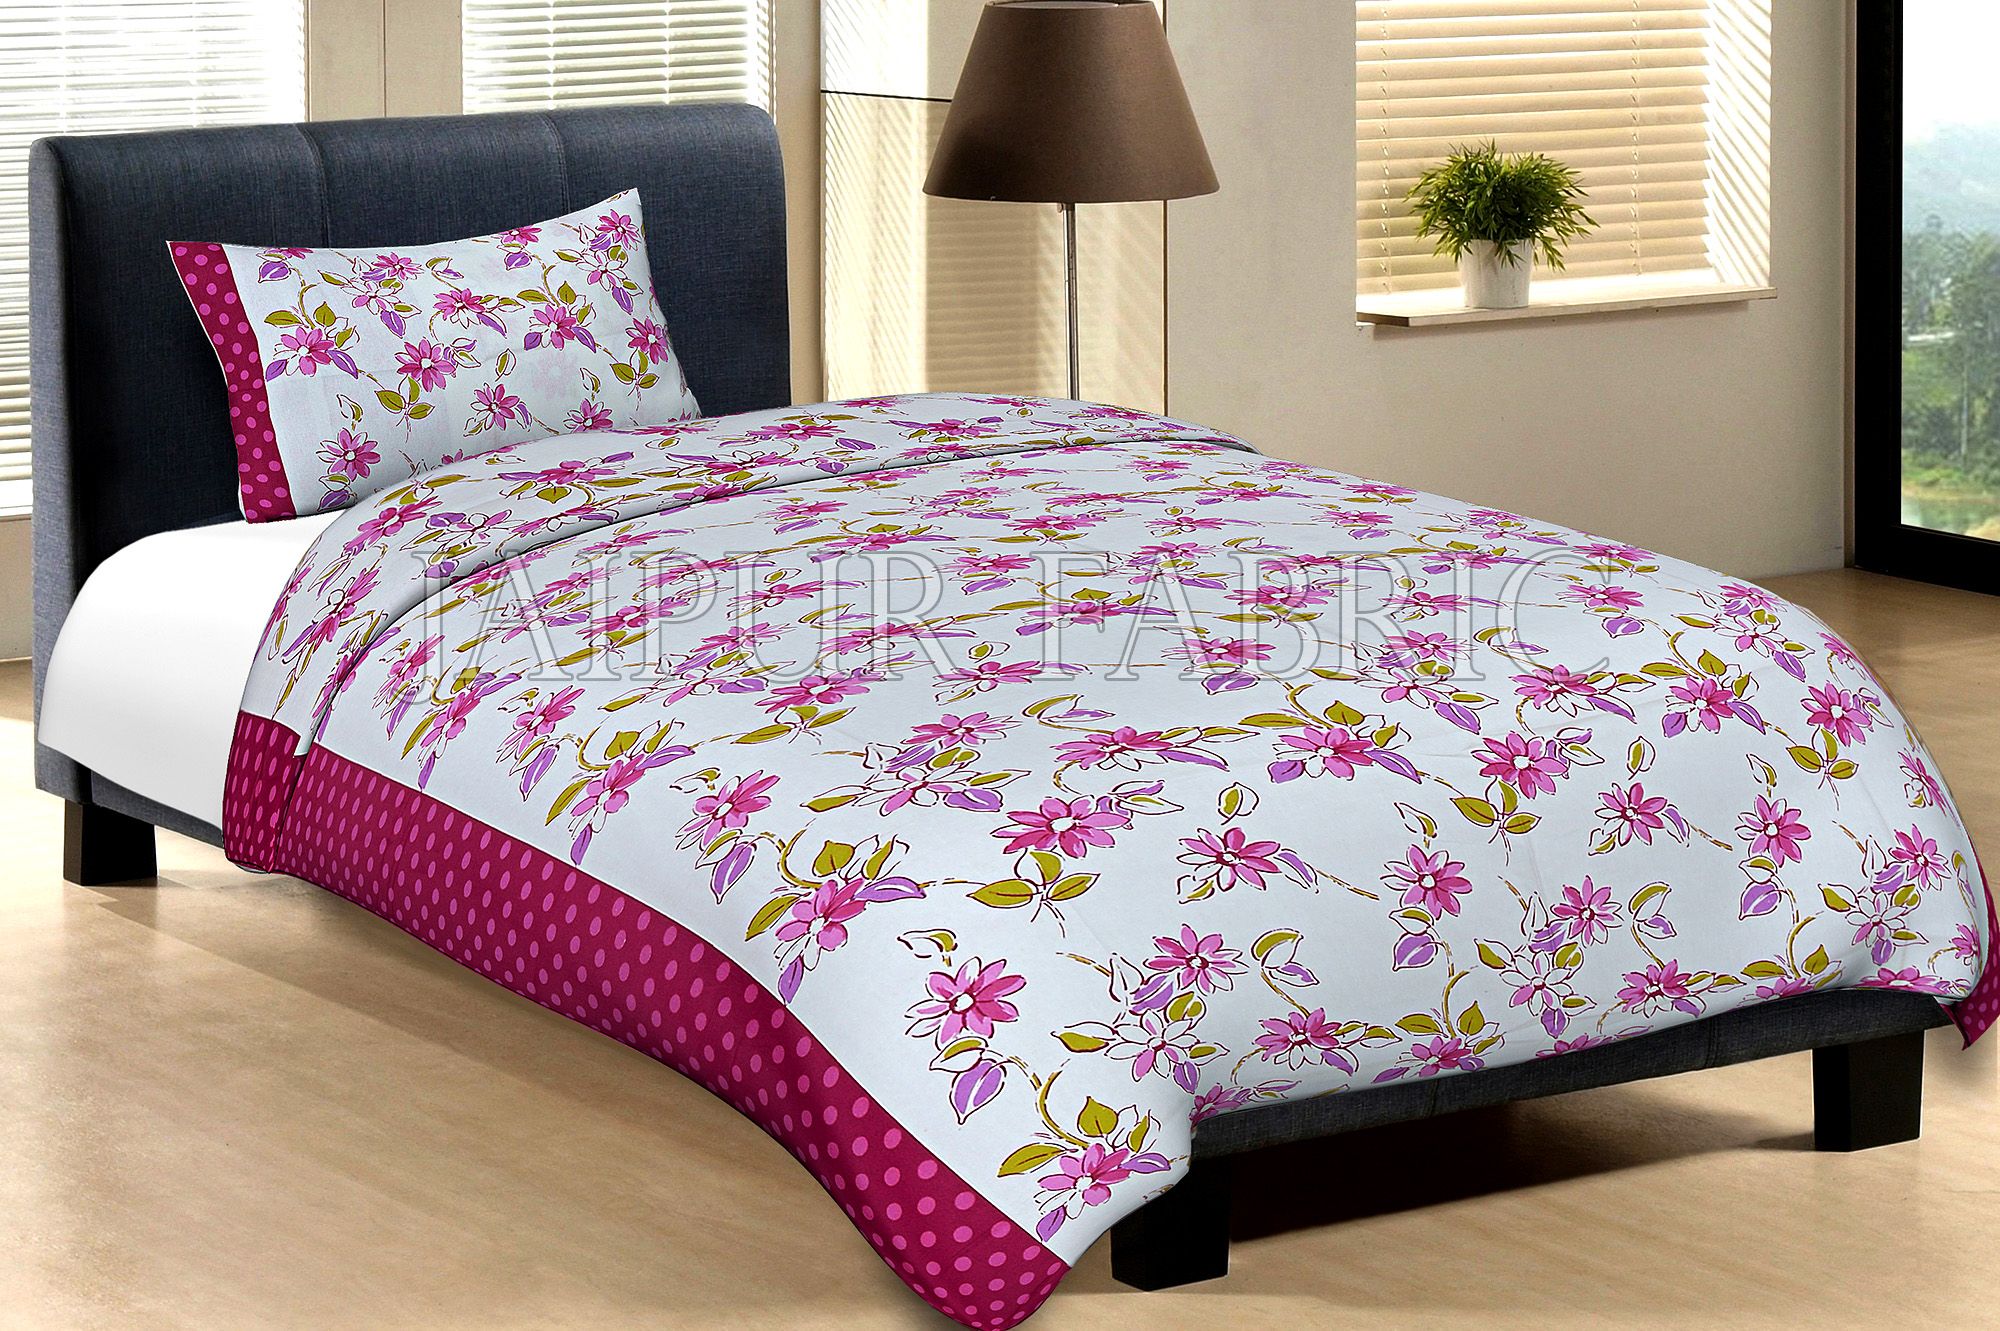 Maroon Border With Pink Polka Dot And White Base With Pink Flower Cotton Single Bed Sheet with